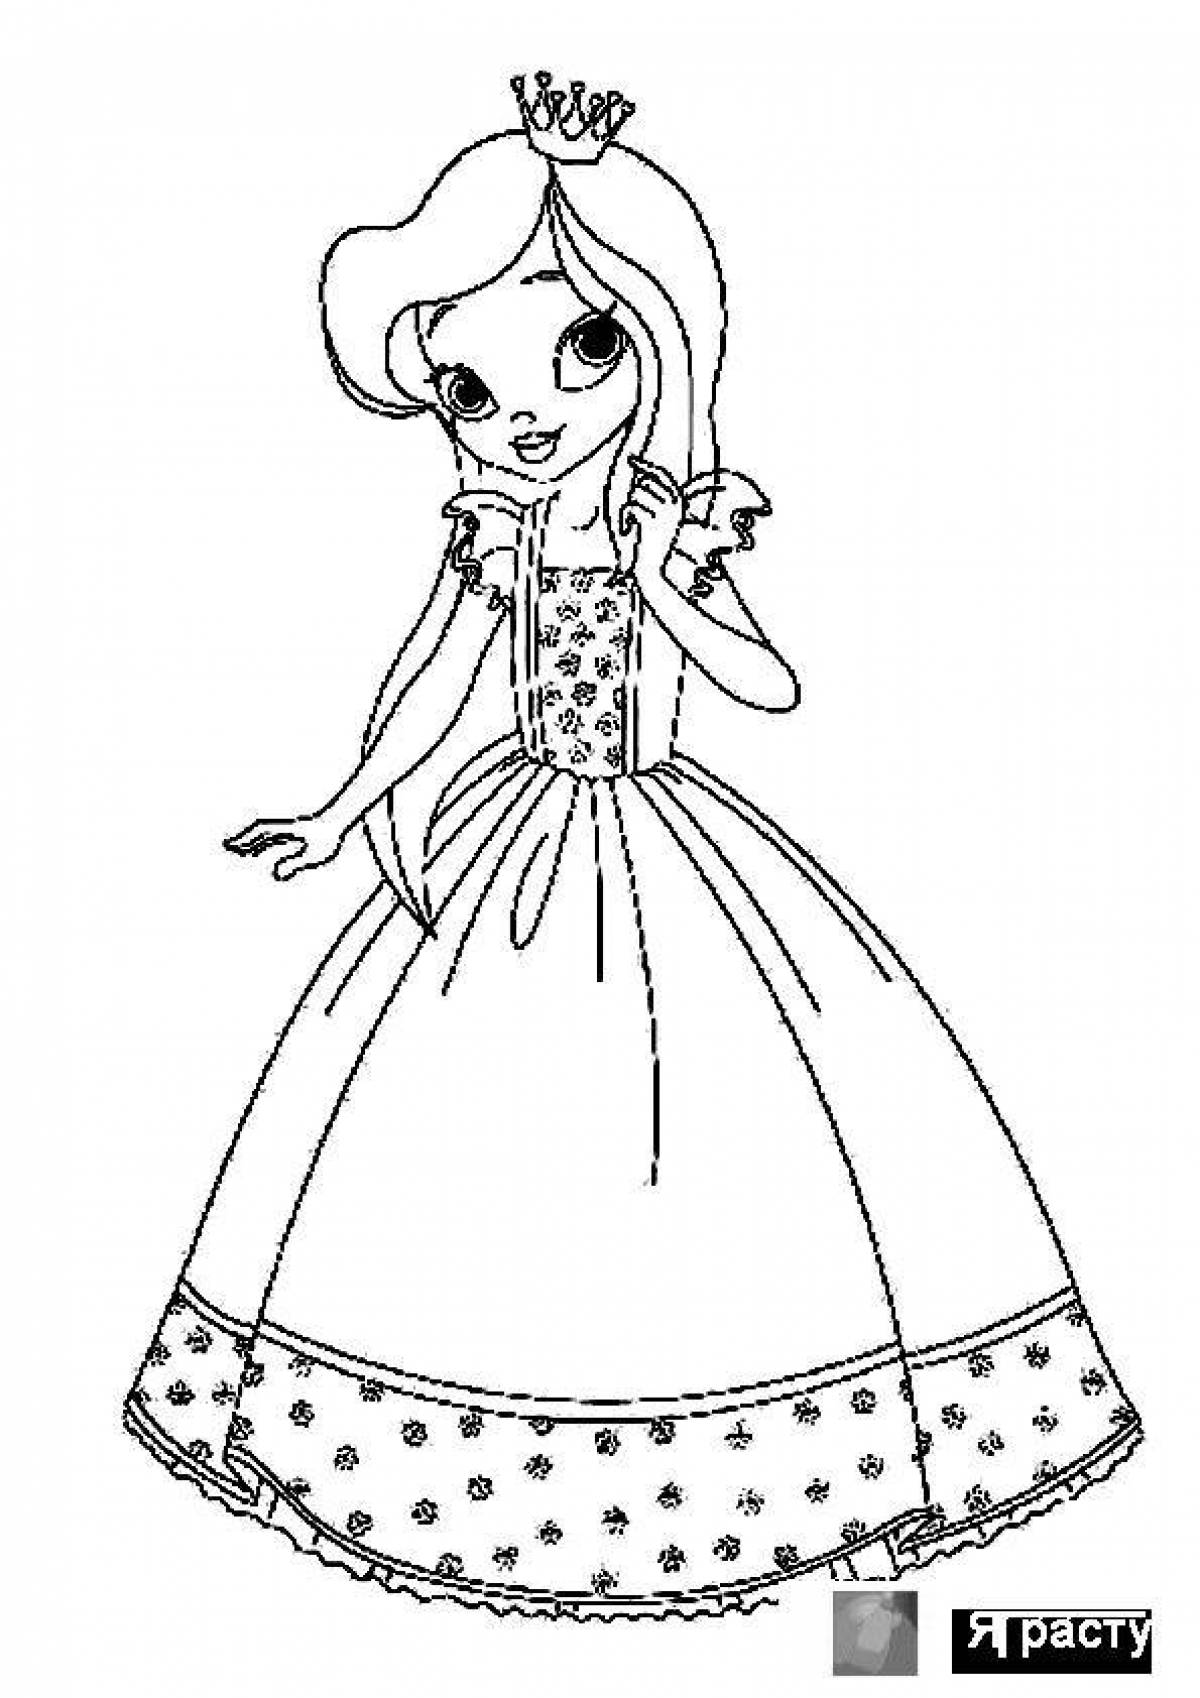 Exquisite doll princess coloring book